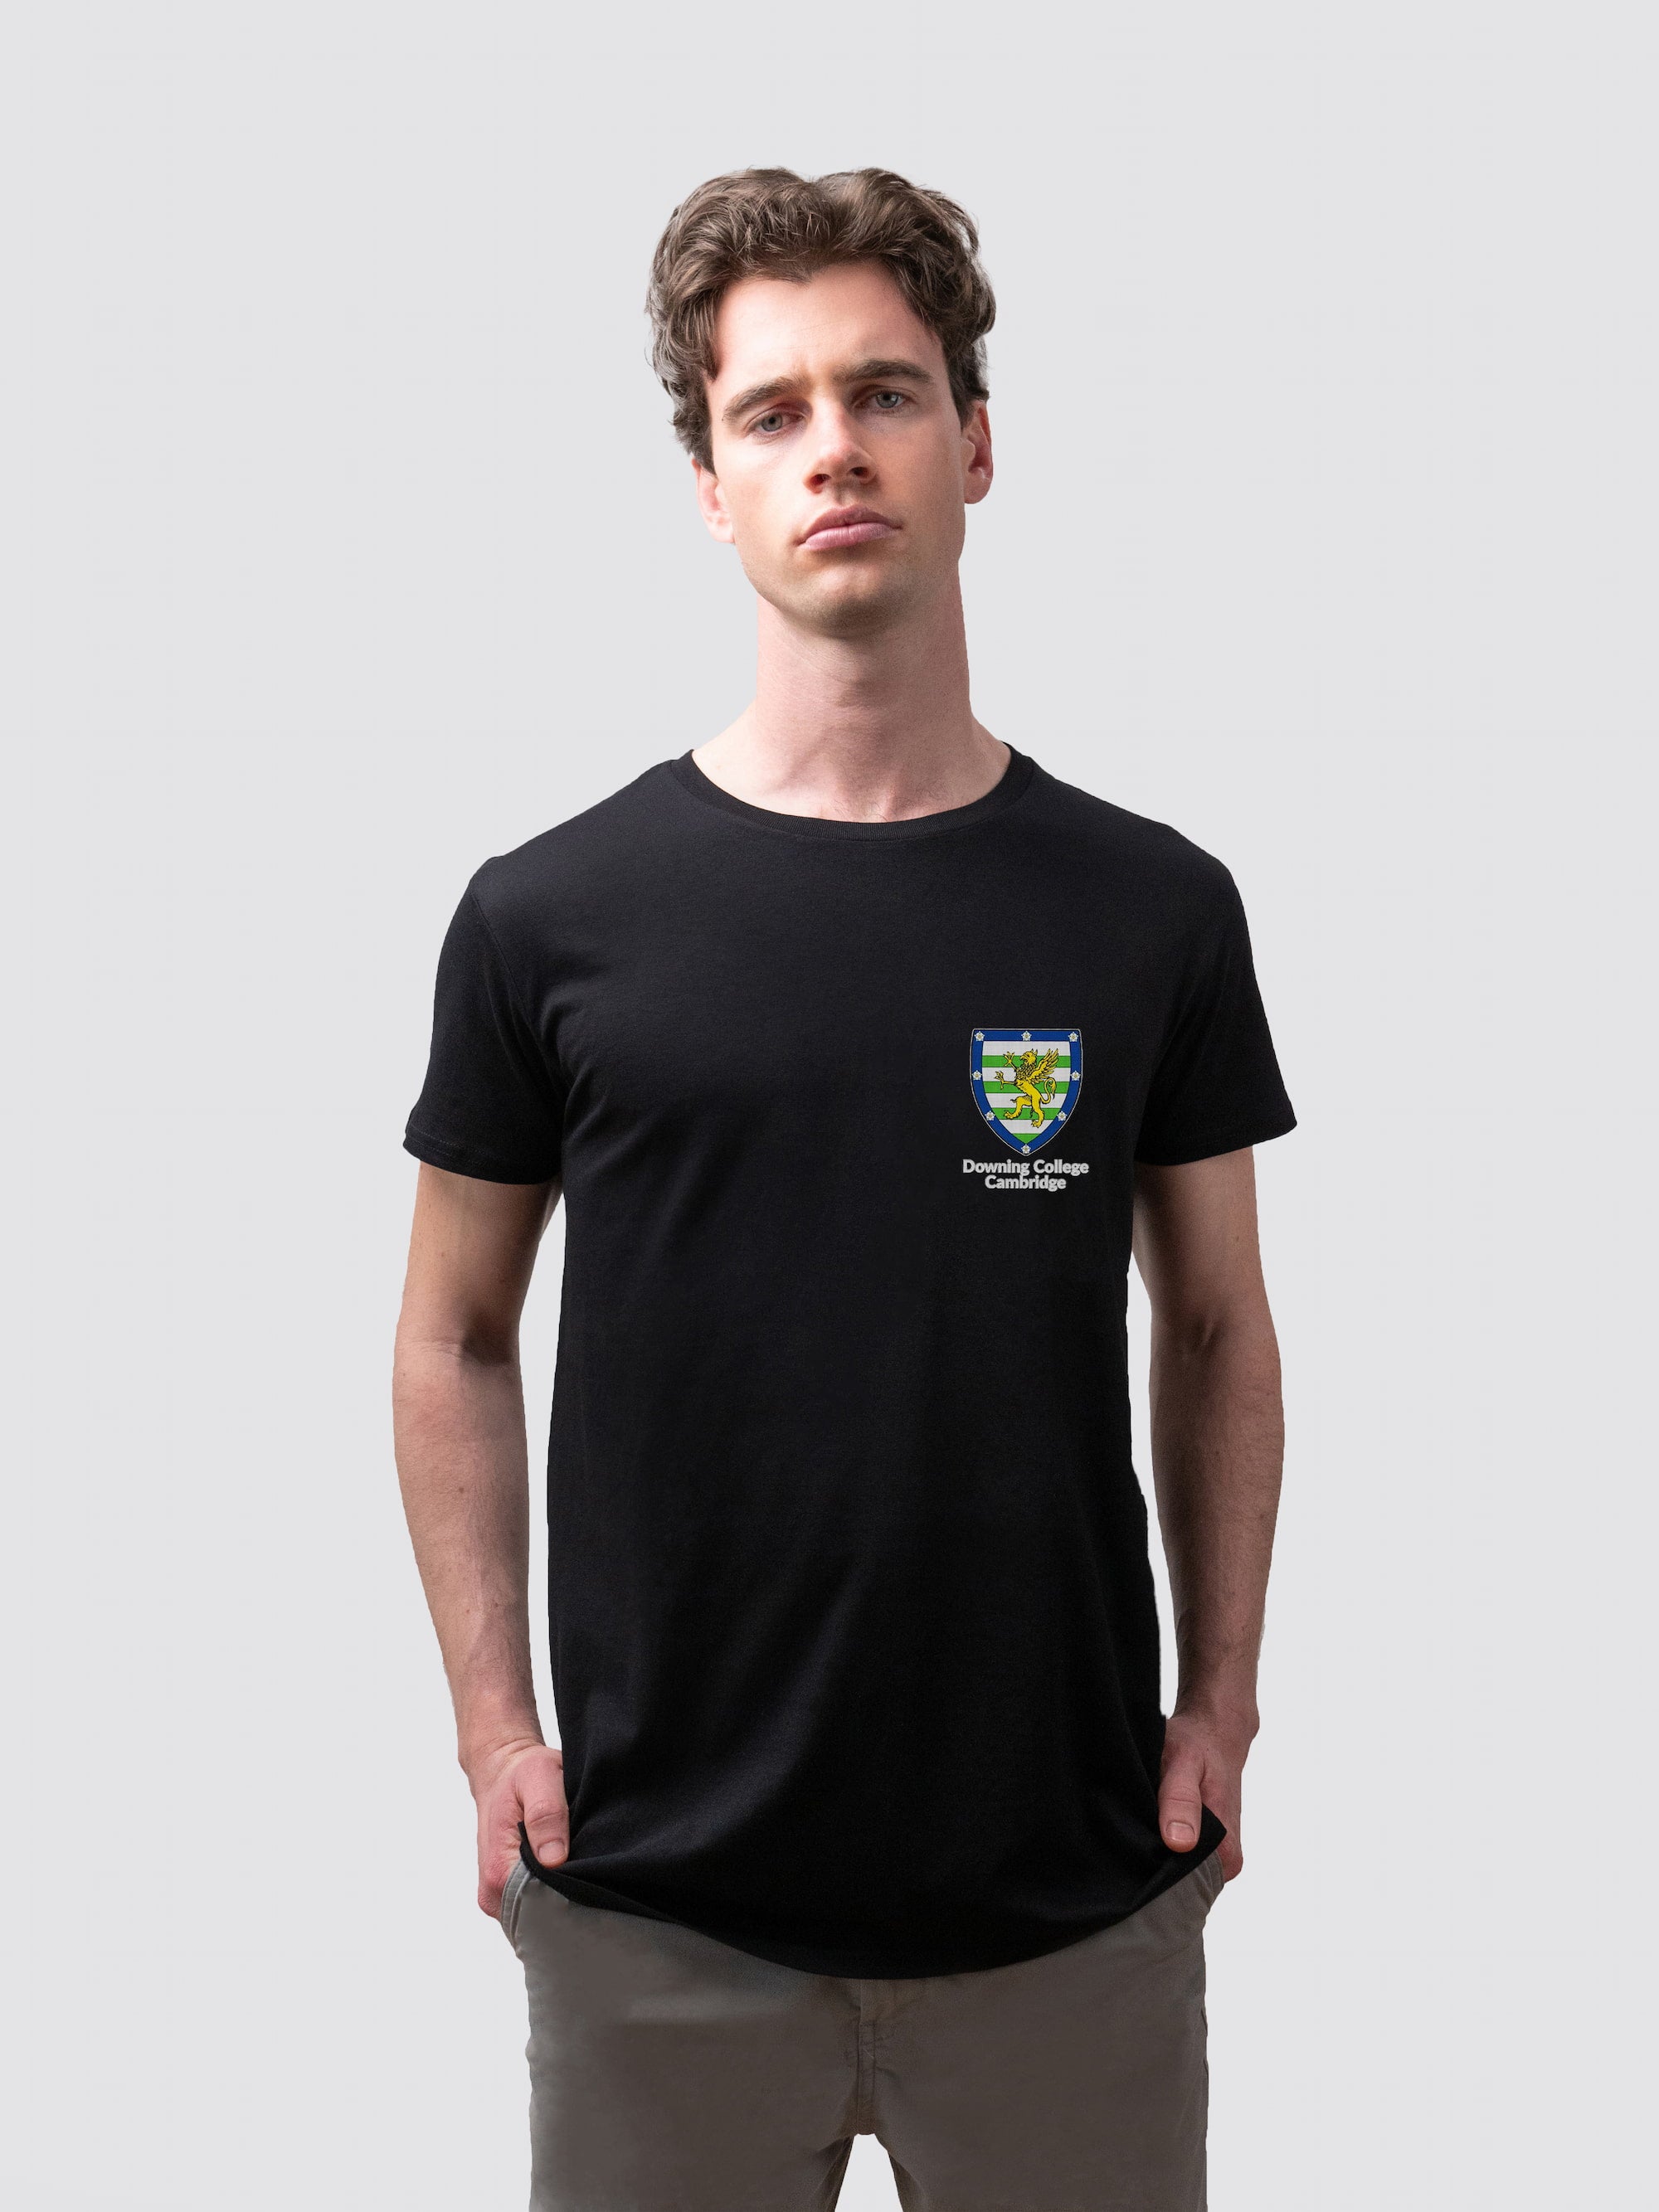 Sustainable Downing t-shirt, made from organic cotton